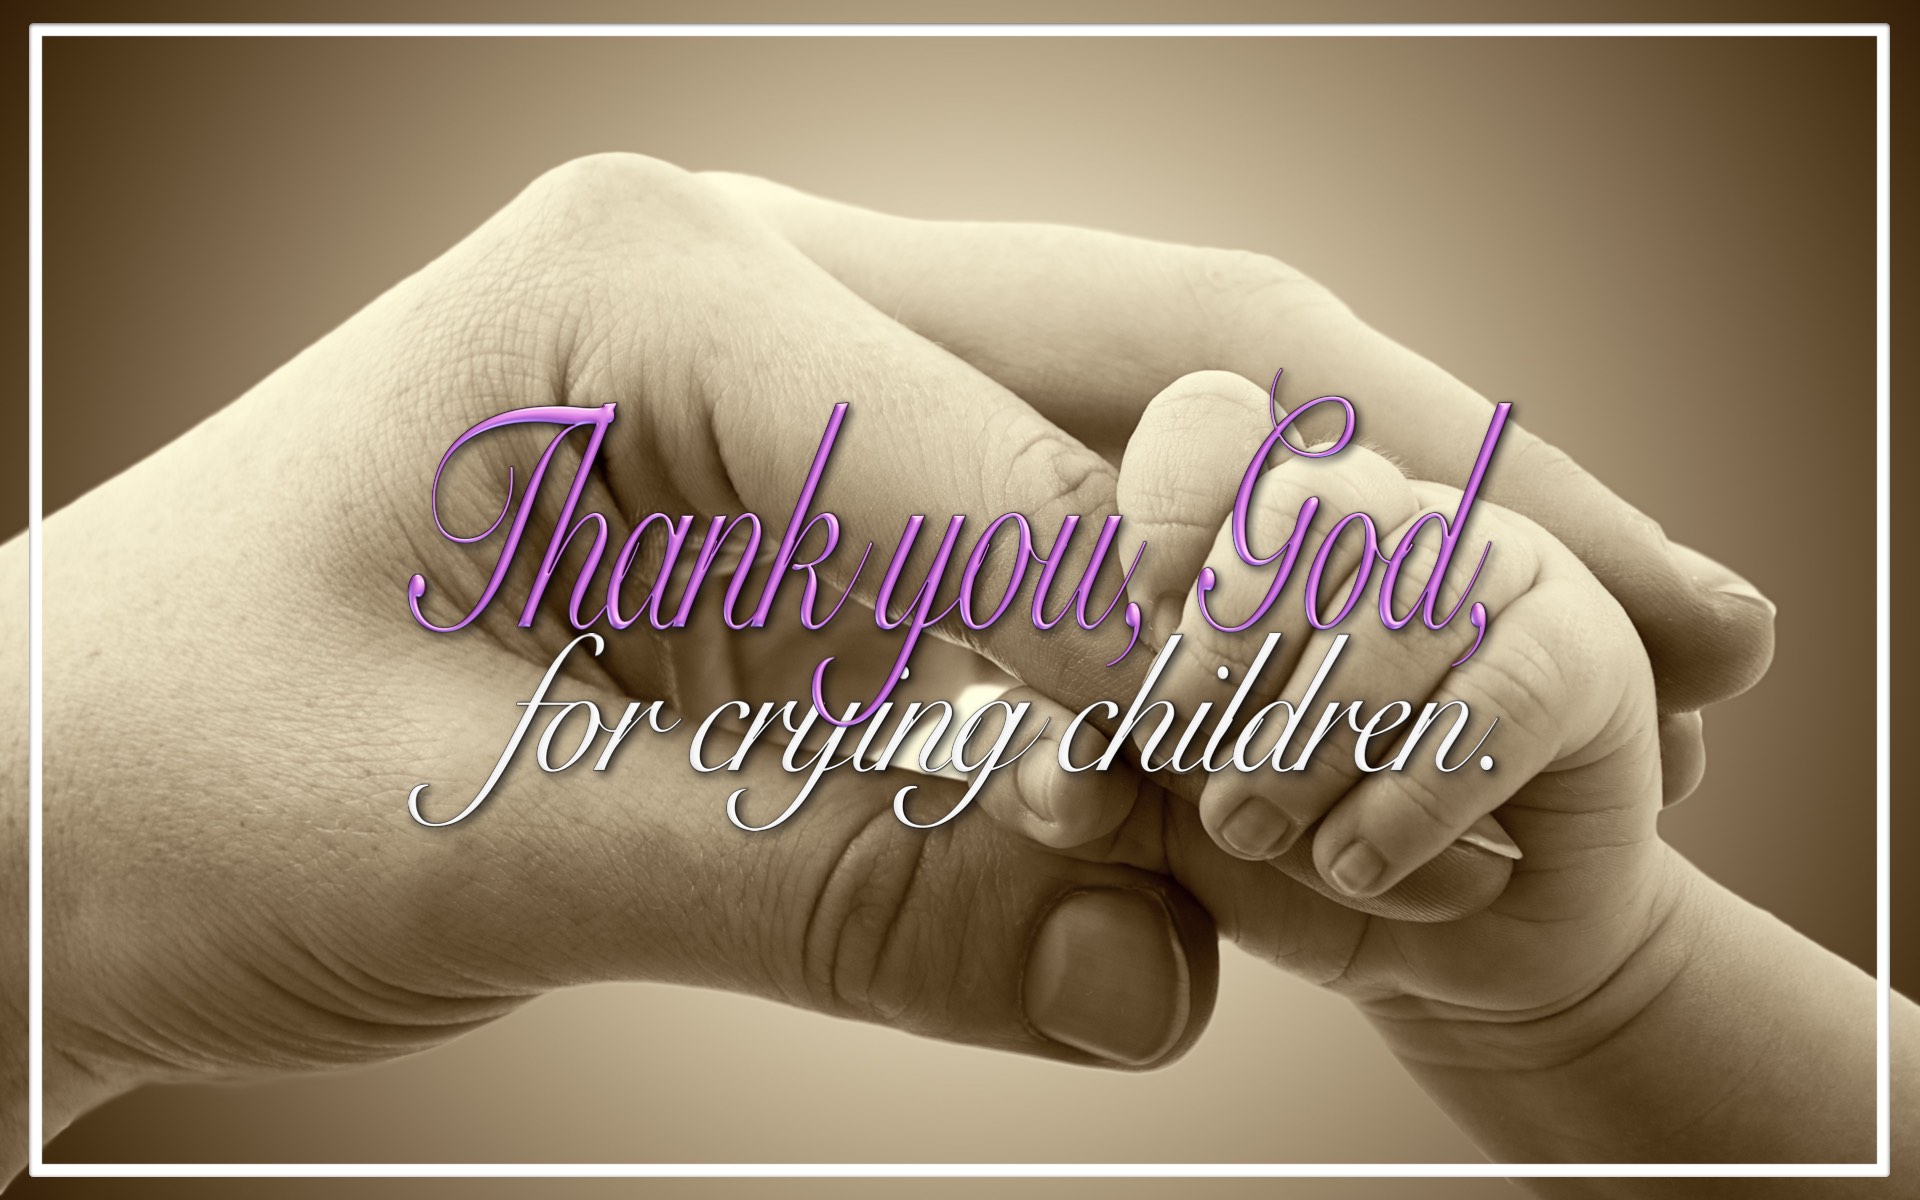 Thank You God for Crying Children